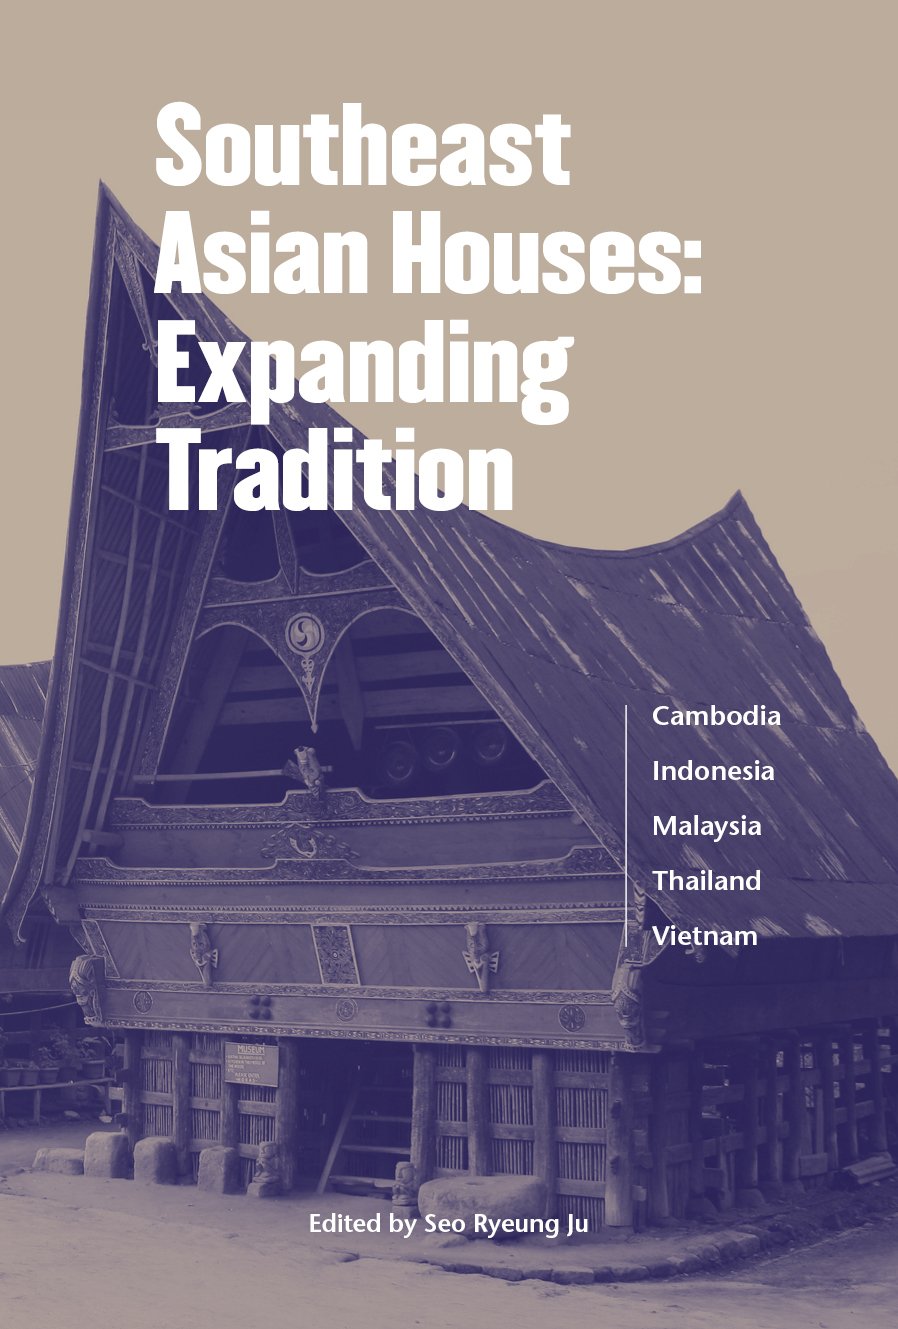 Book Chapter: Tradition and Modernization in Indonesian Vernacular Houses